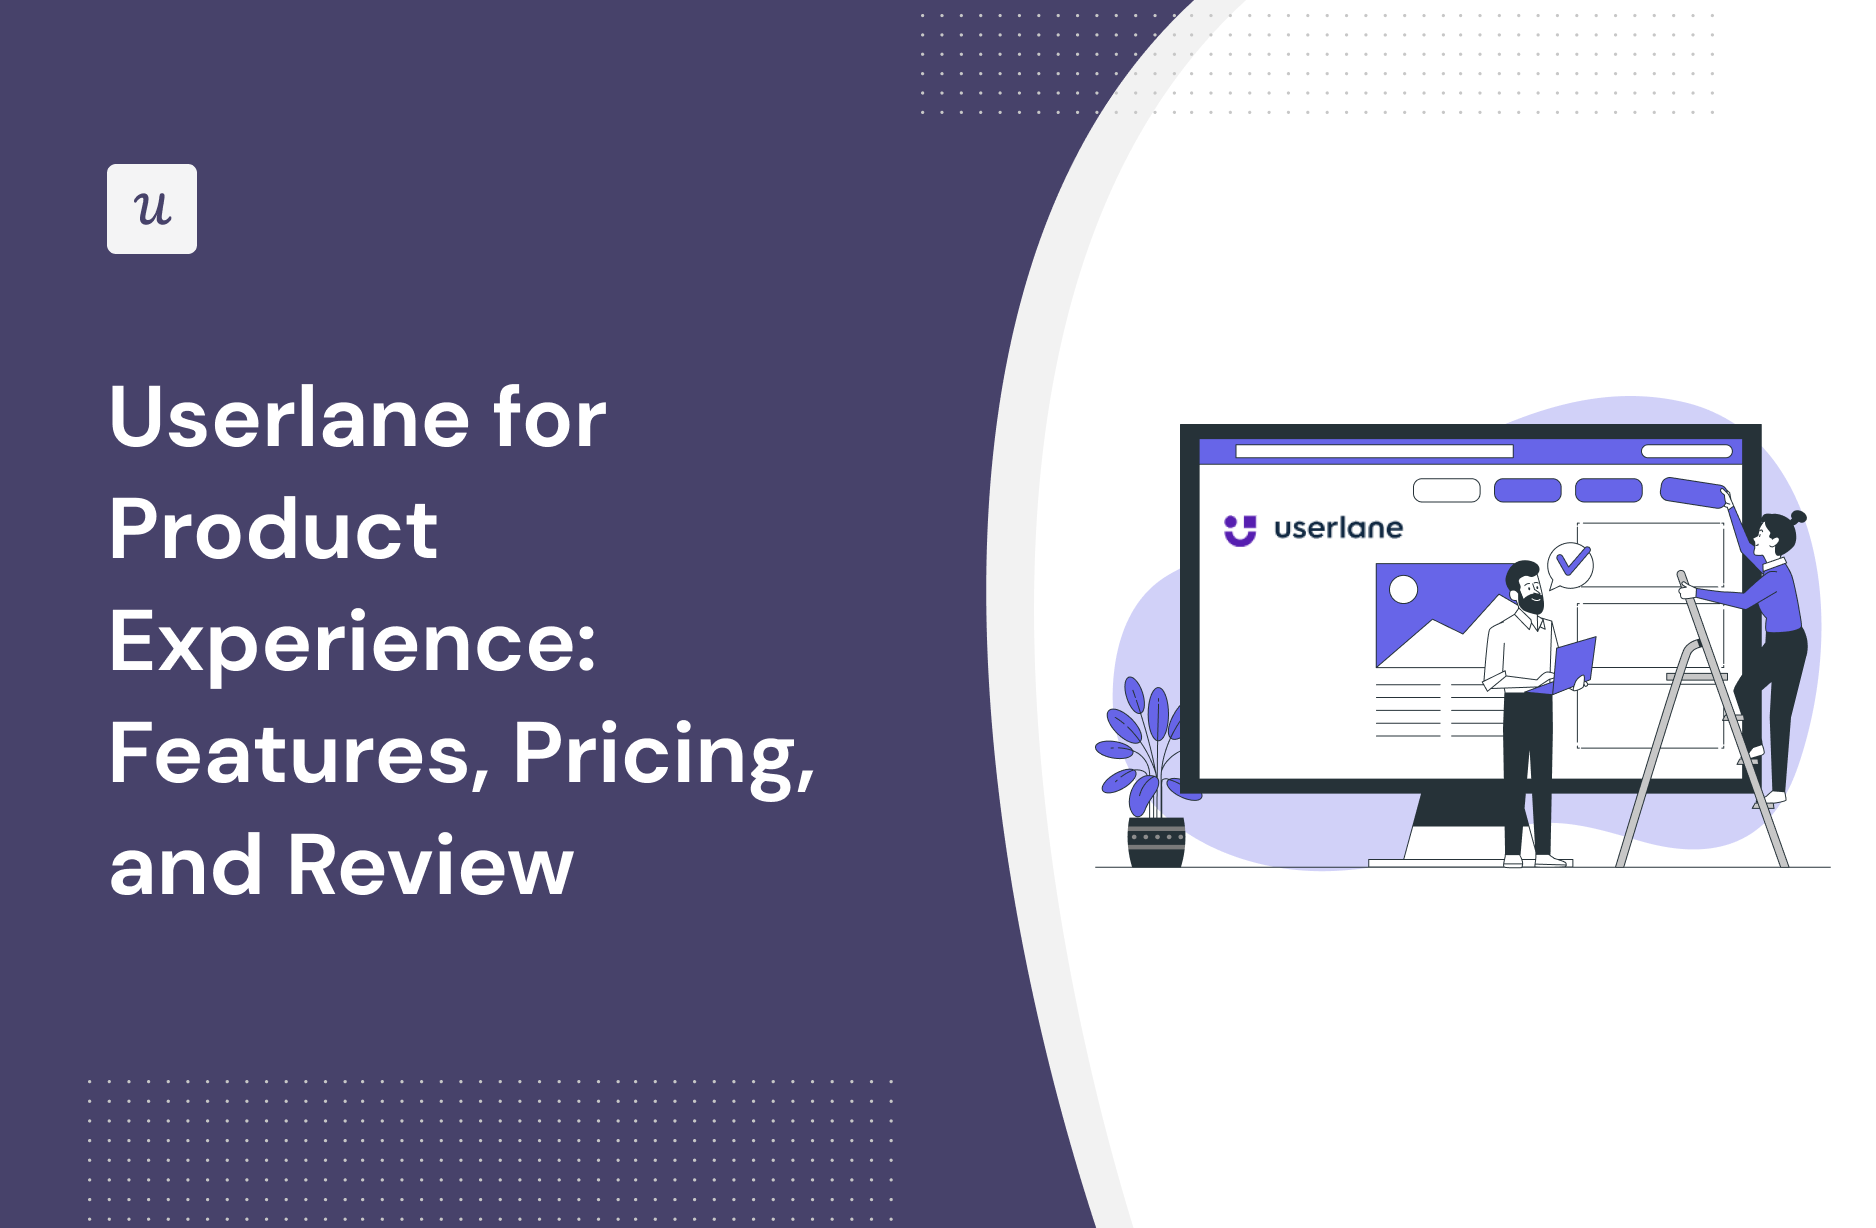 Userlane for Product Experience: Features, Pricing, and Review